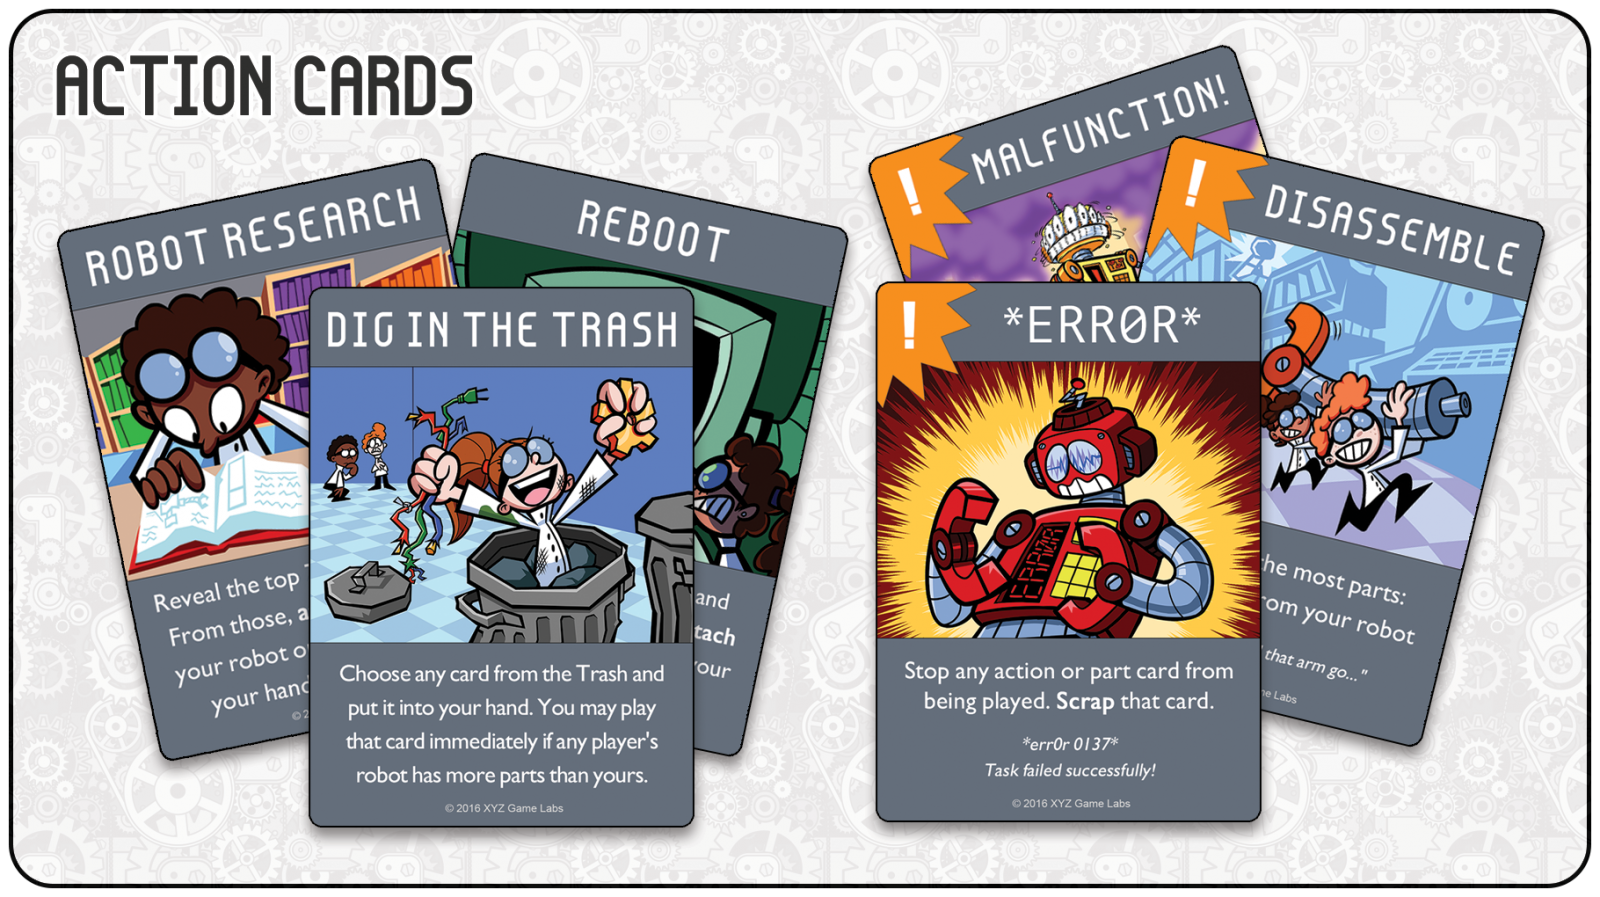 RobotLab action cards